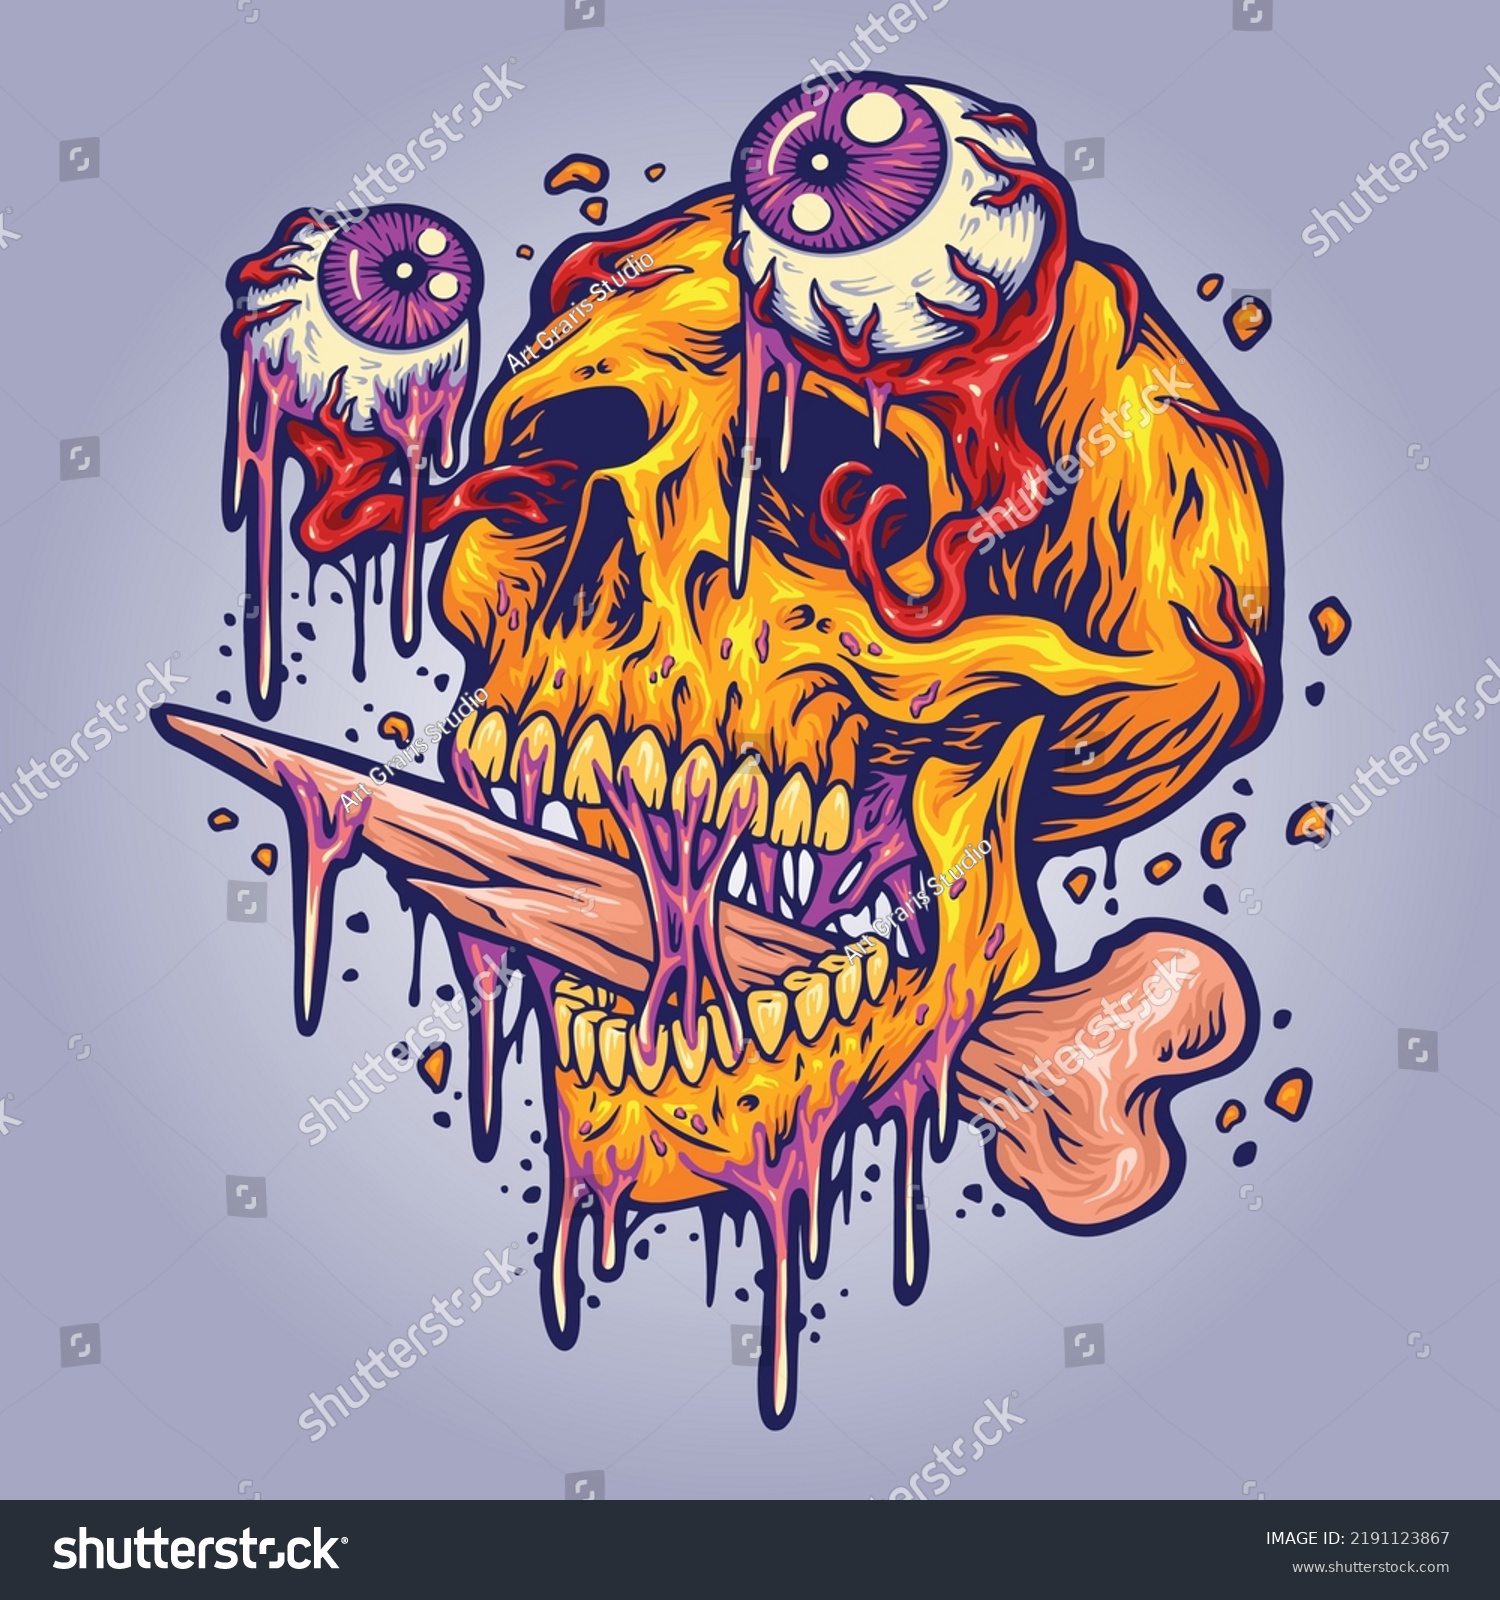 SVG of Scary skull head with zombie eyes vector illustrations for your work logo, merchandise t-shirt, stickers and label designs, poster, greeting cards advertising business company or brands svg